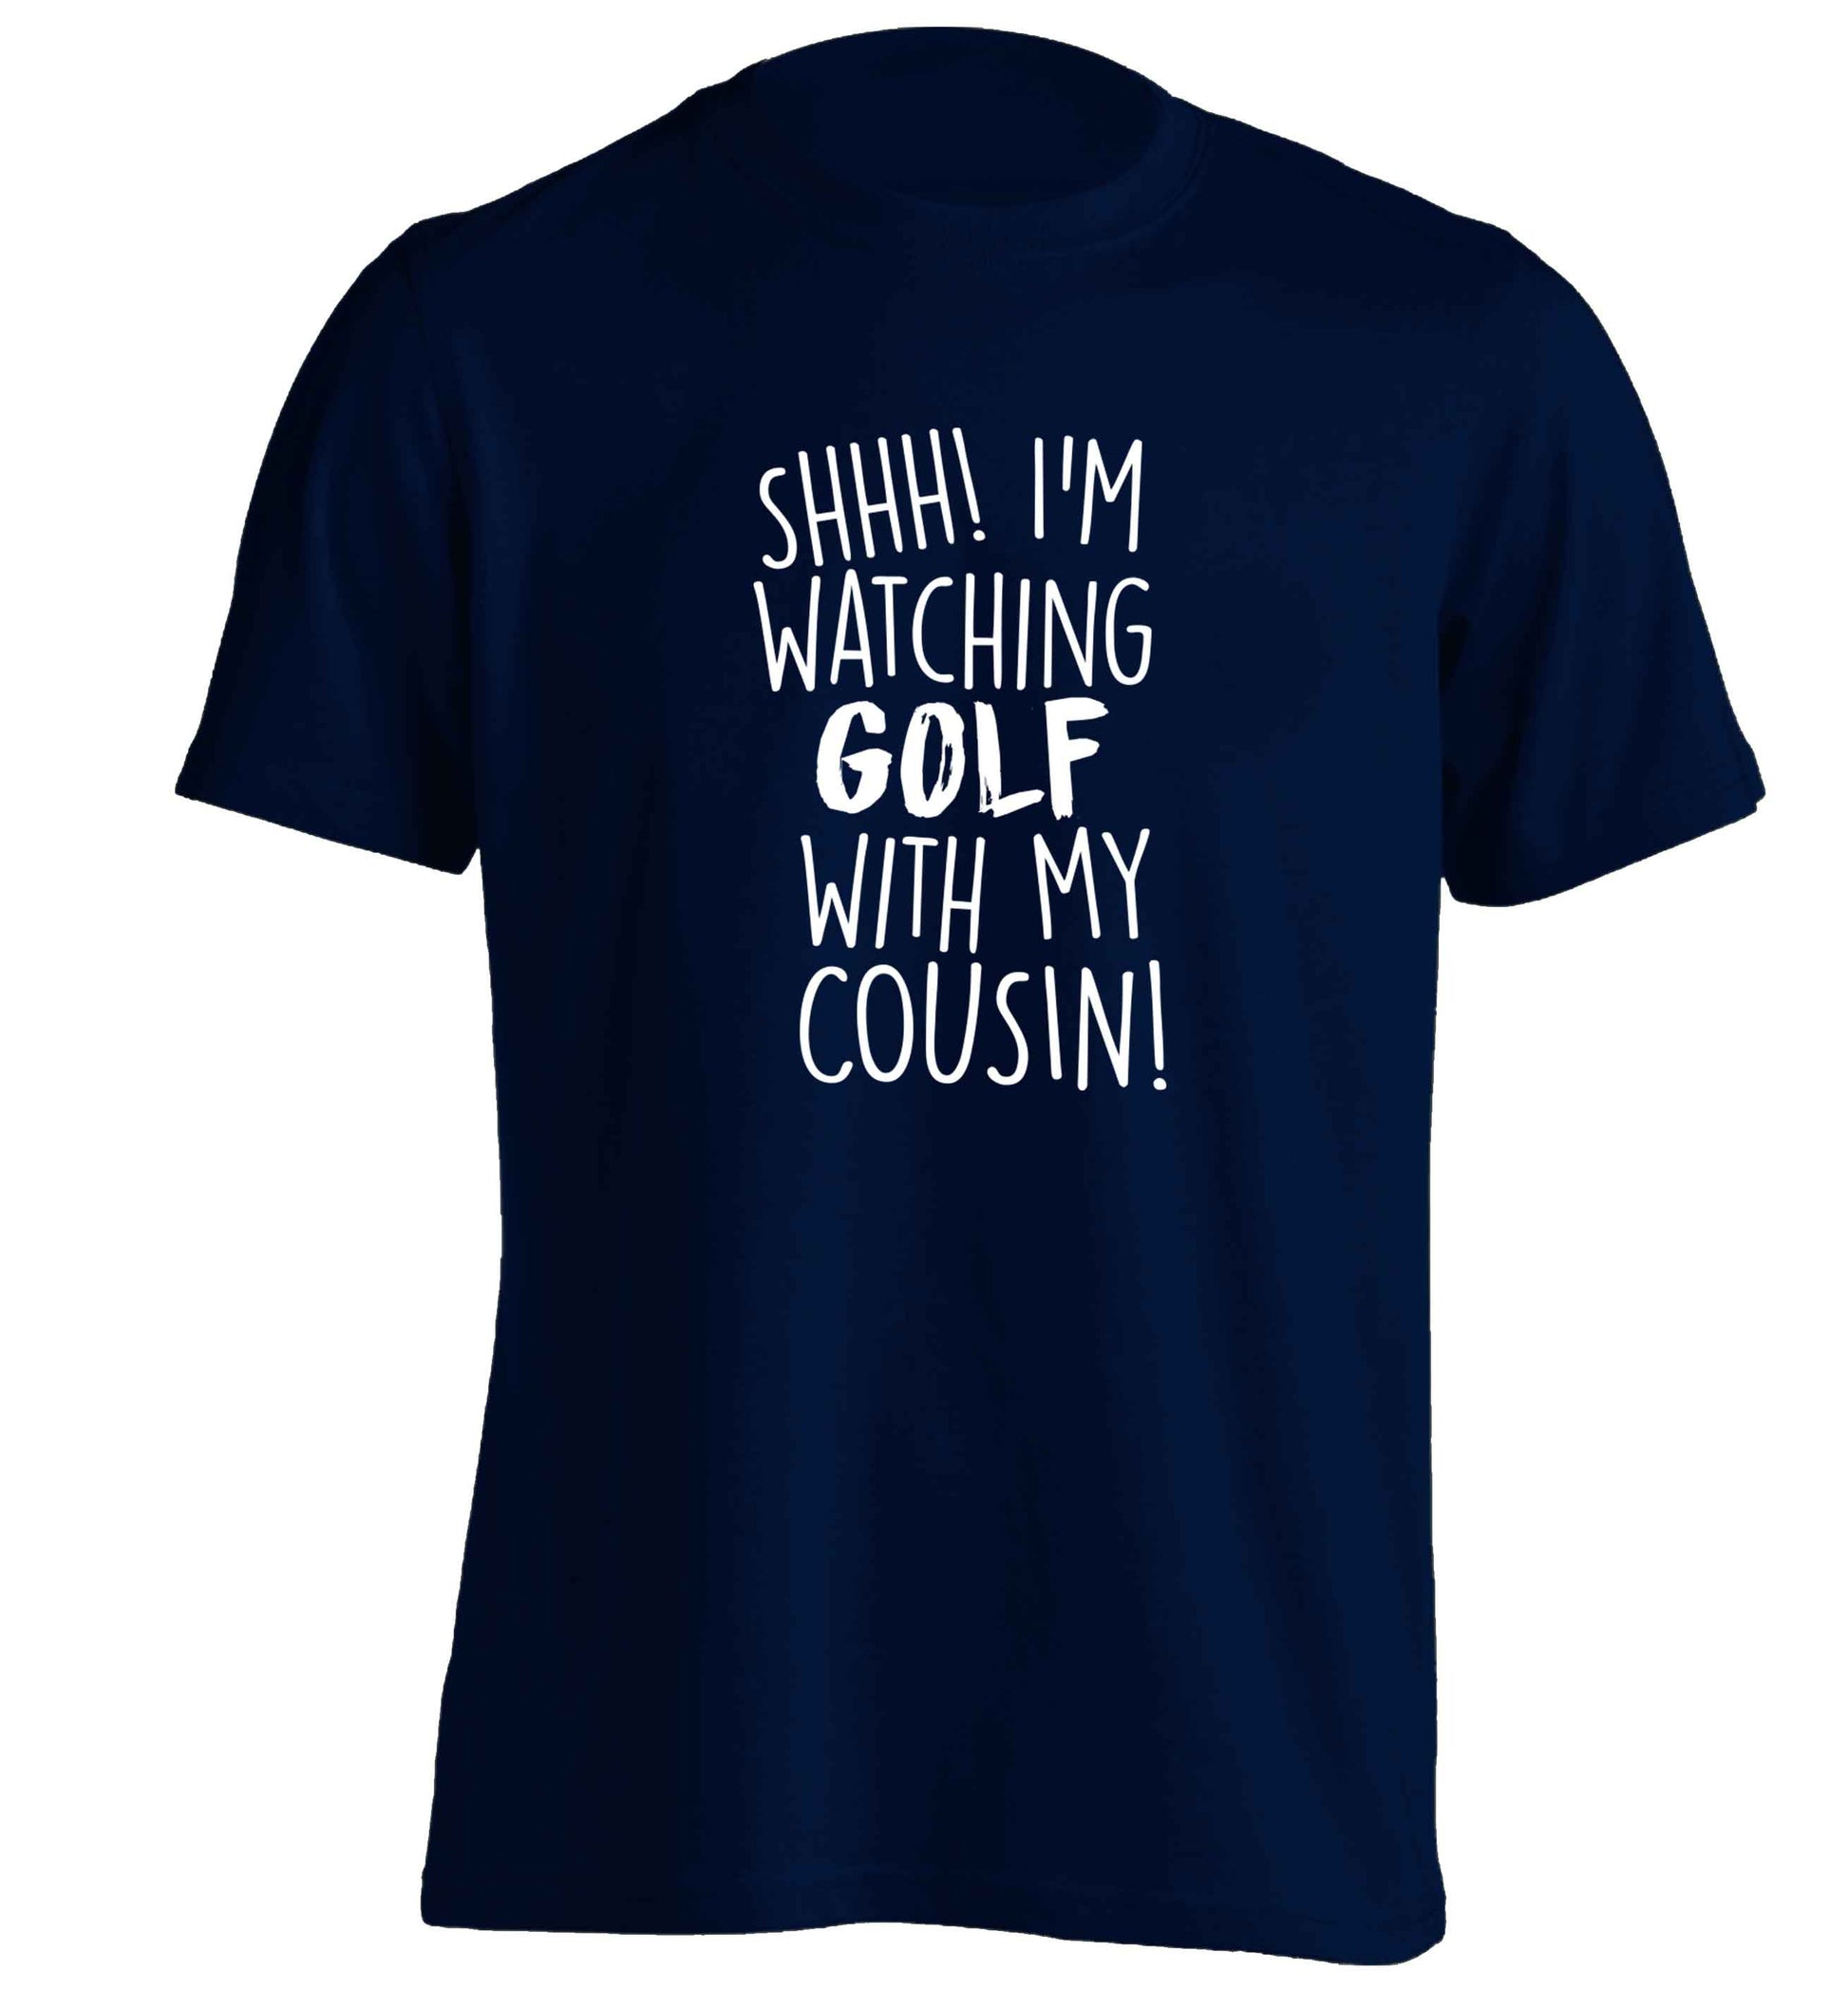 Shh I'm watching golf with my cousin adults unisex navy Tshirt 2XL